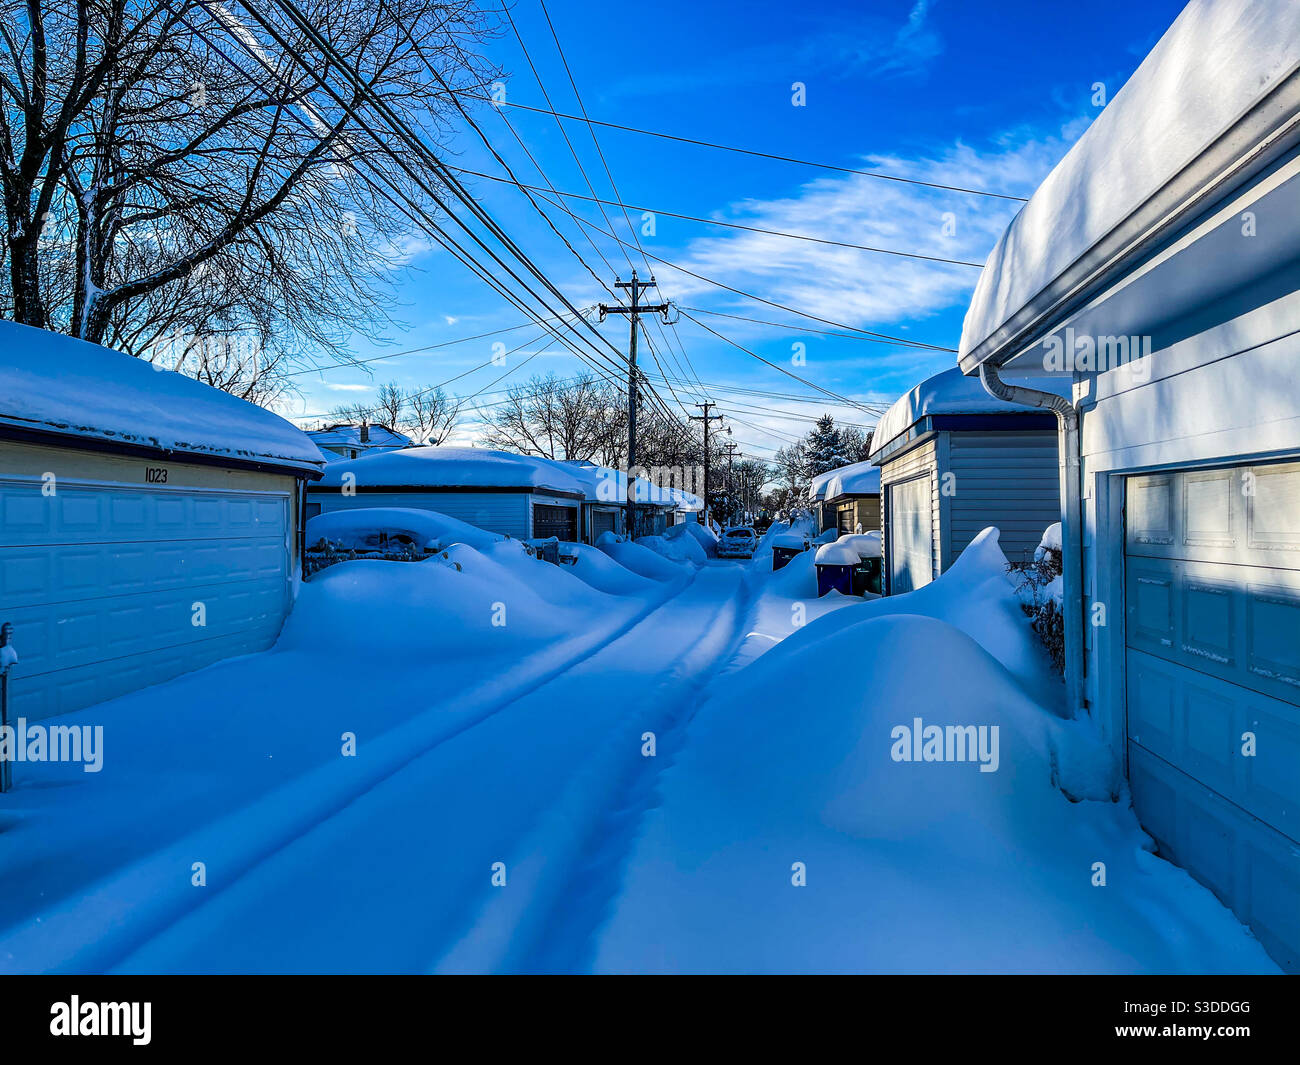 Oak Park, Illinois, USA. 16th February 2021. An alley choked with snow after a winter storm dumped over 12 inches/25cm of snow in this western suburb of Chicago. Stock Photo